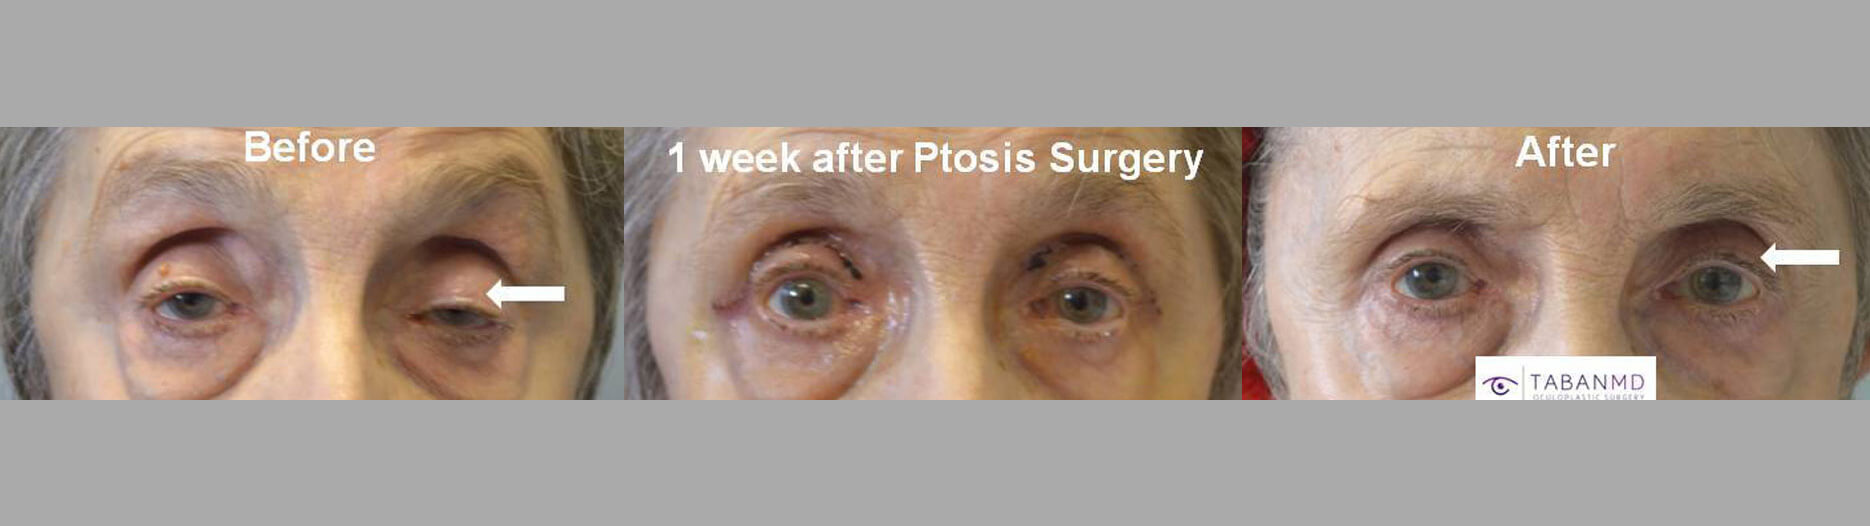 86-year-old female, with severe age-related droopy upper eyelids underwent functional droopy upper eyelid surgery. Before, 1 week after, and 1 month after eyelid ptosis repair photos are shown.